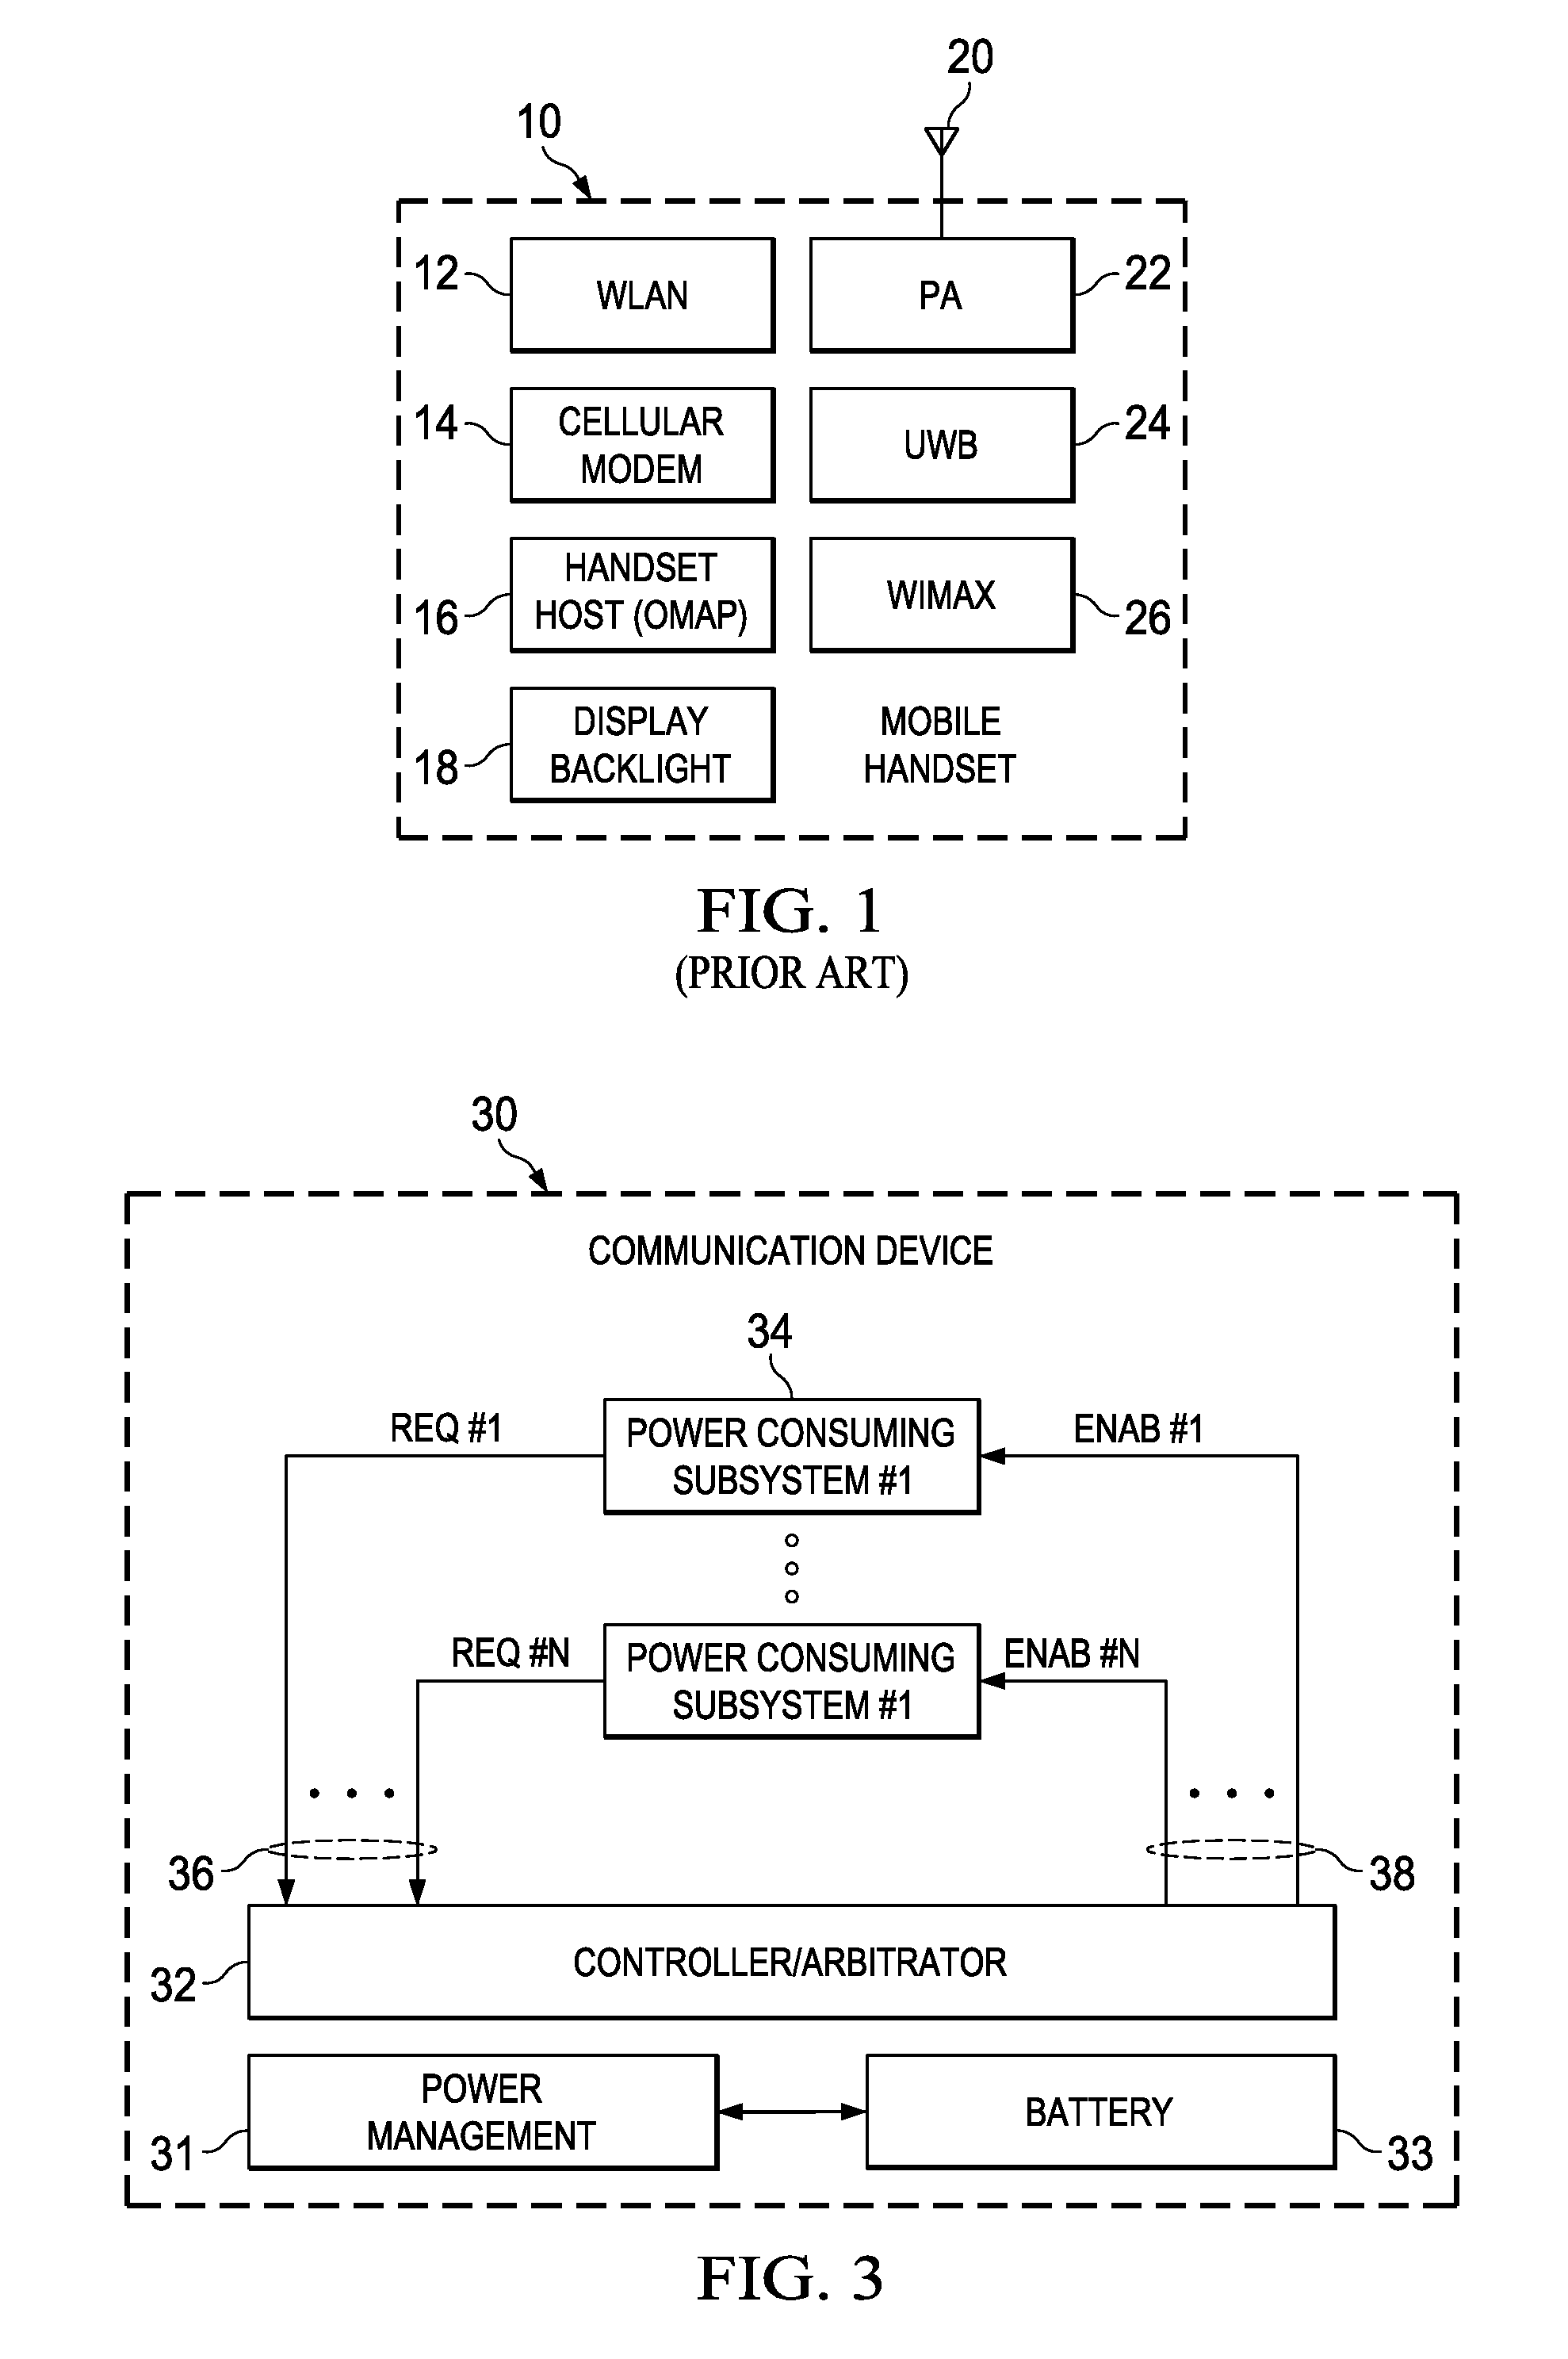 Apparatus for and method of managing peak current consumption of multiple subsystems in a mobile handset